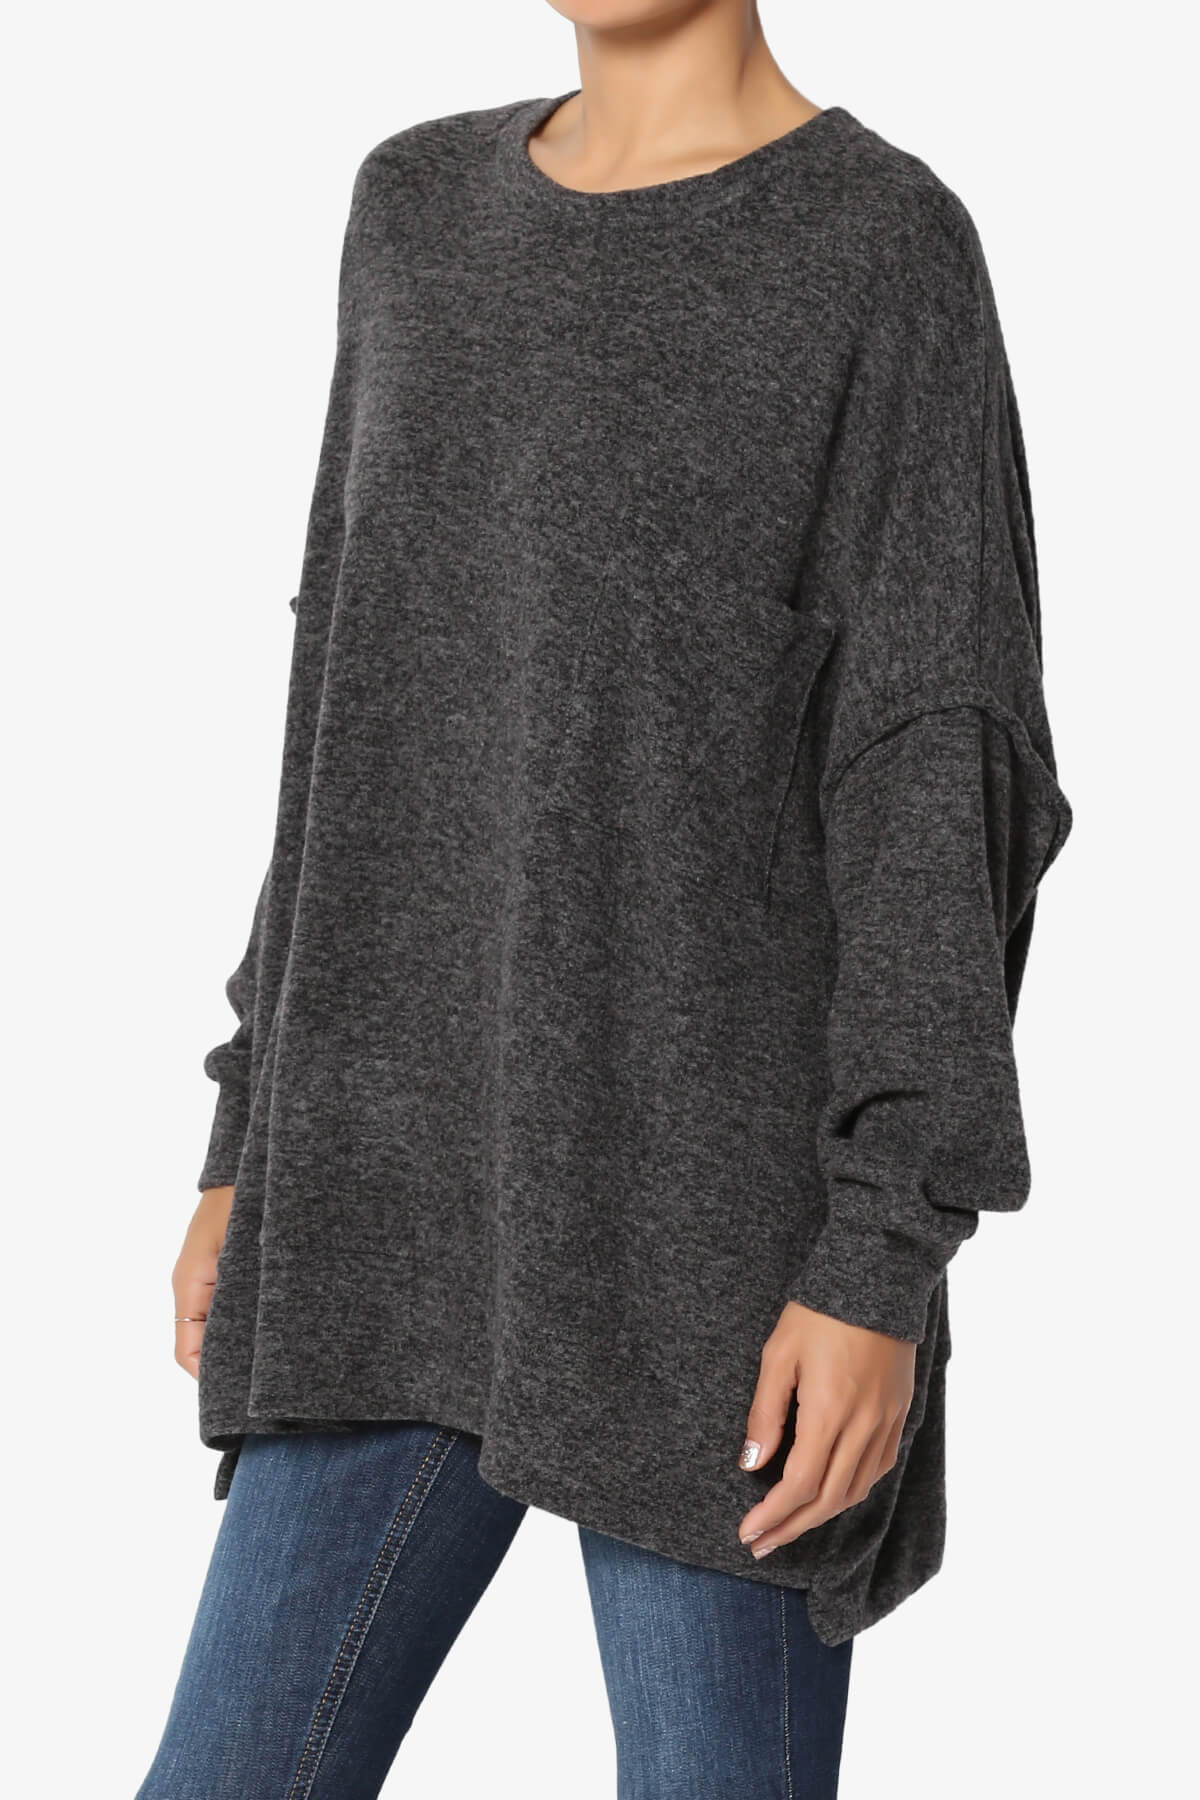 Load image into Gallery viewer, Breccan Blushed Knit Oversized Sweater BLACK_3
